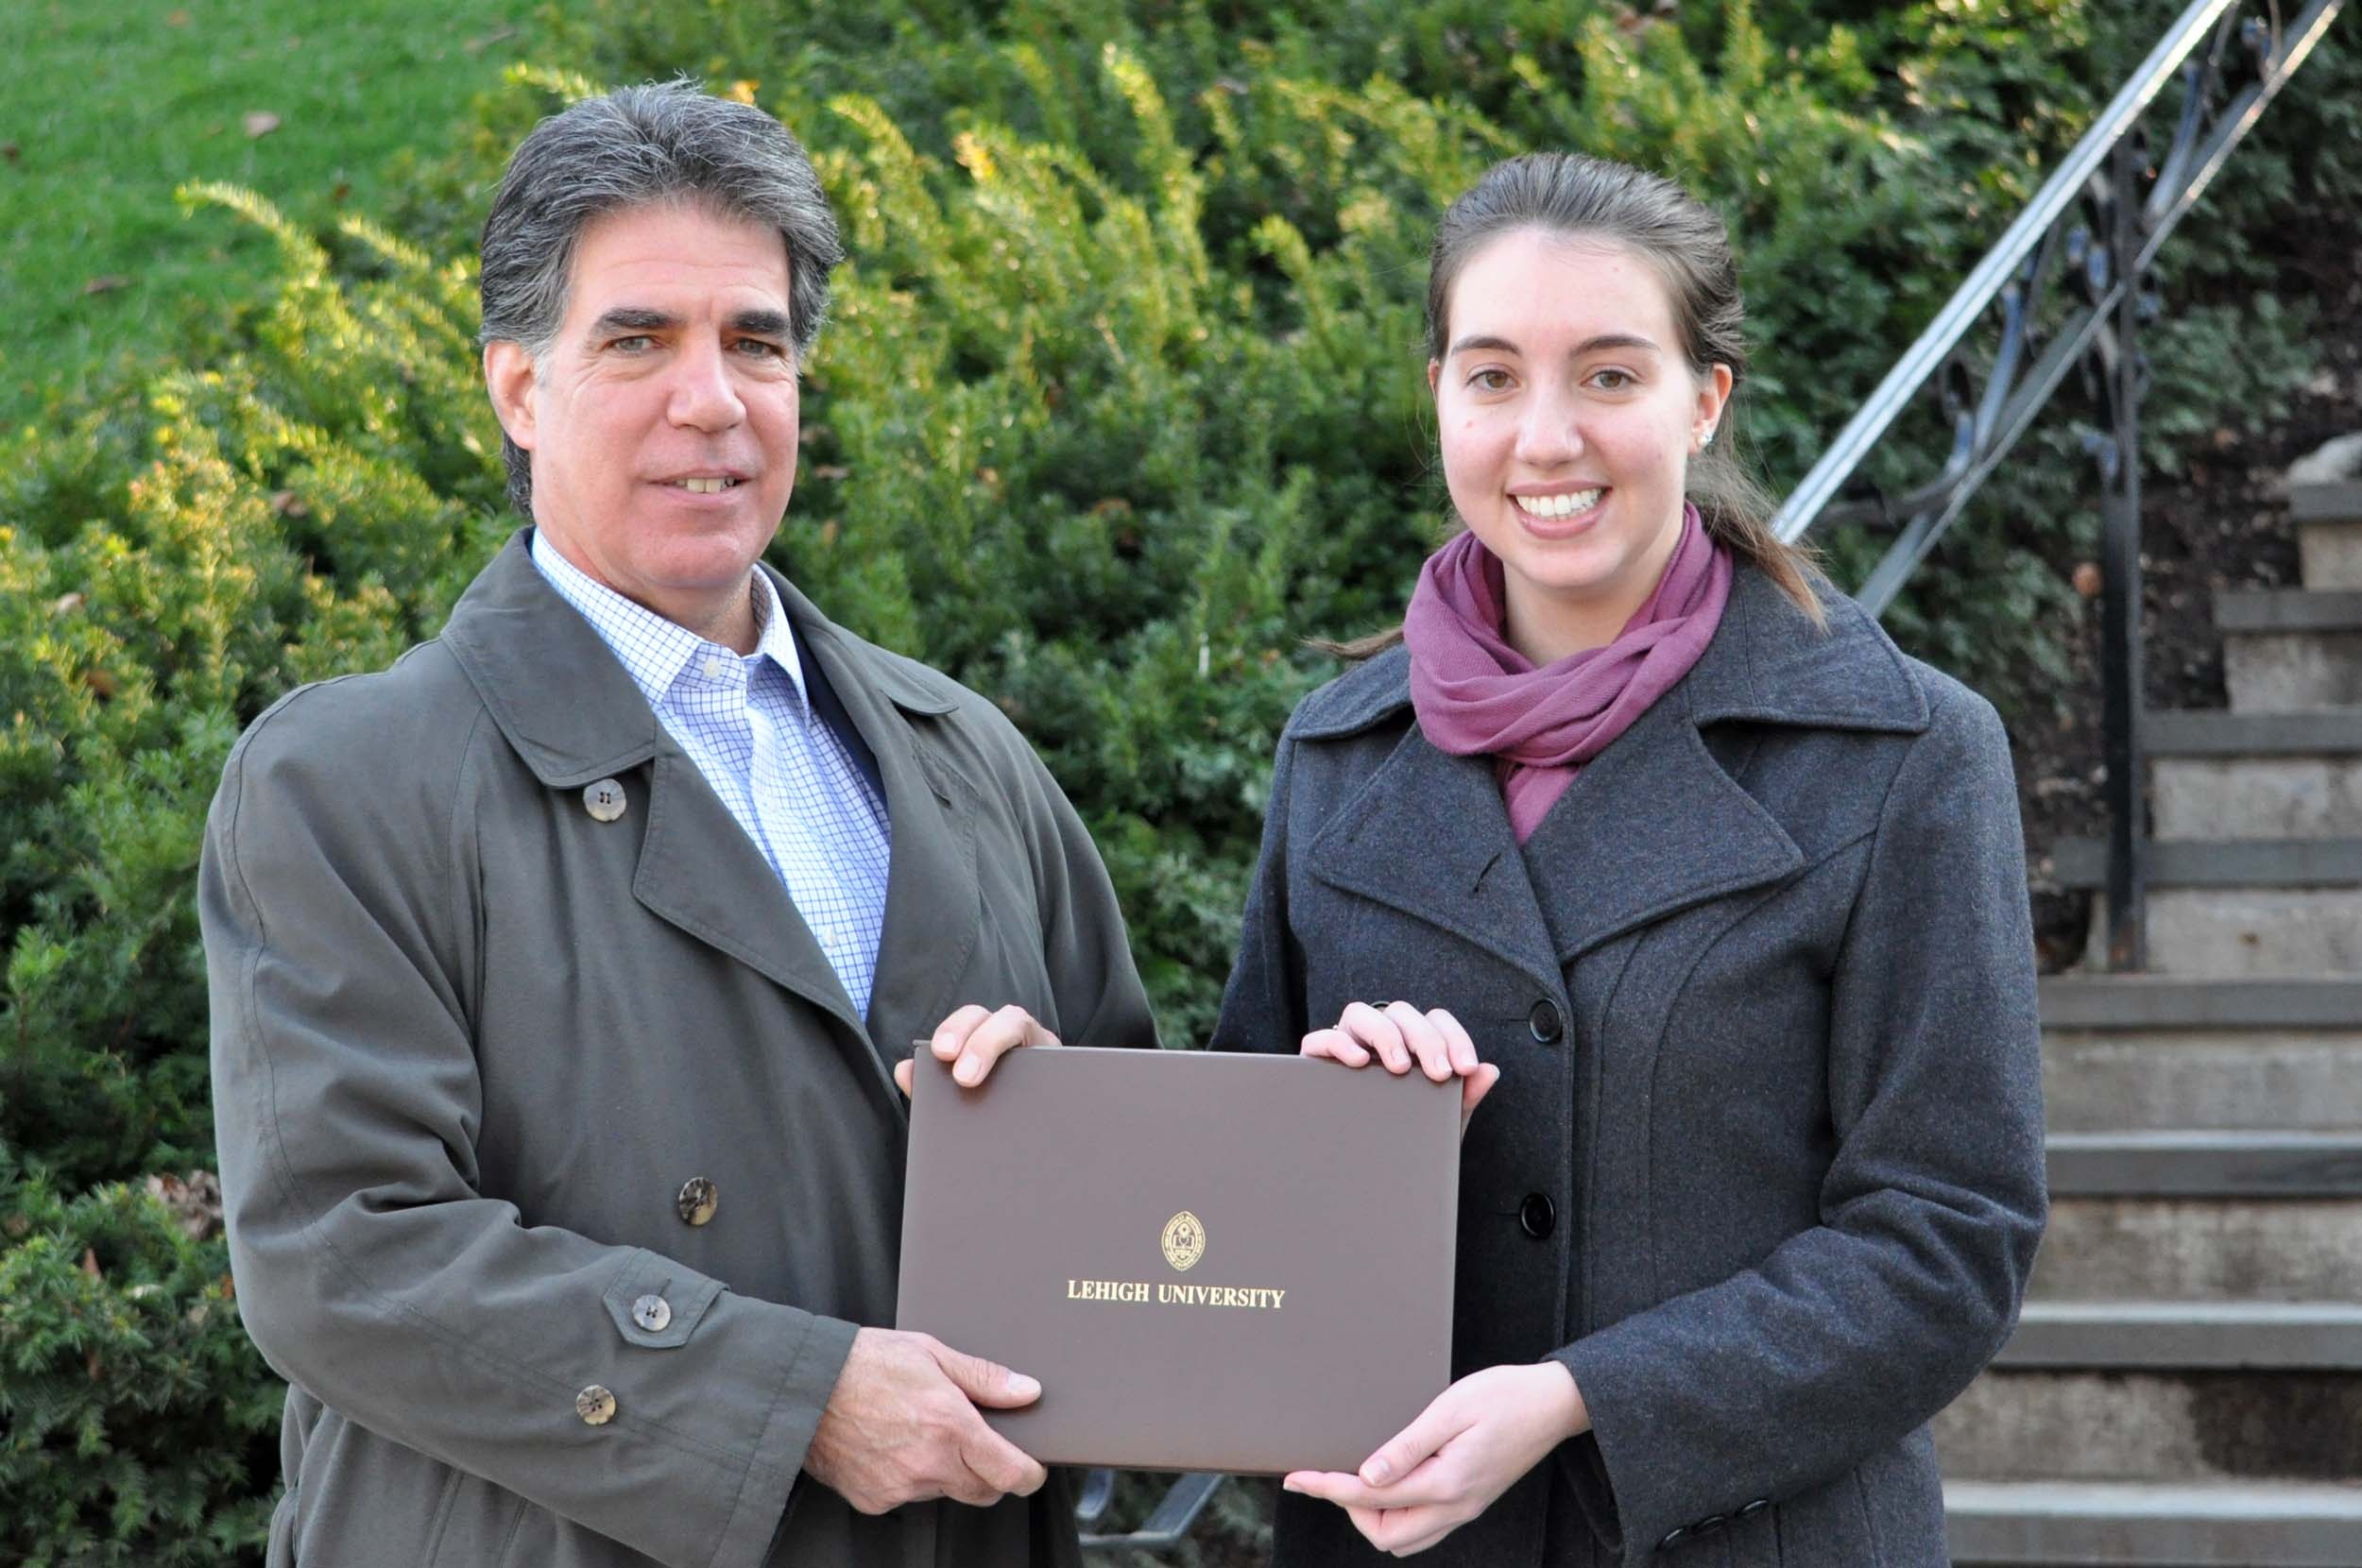 Lisa Vienckowski, a student enrolled in the Master of Engineering in Structural 